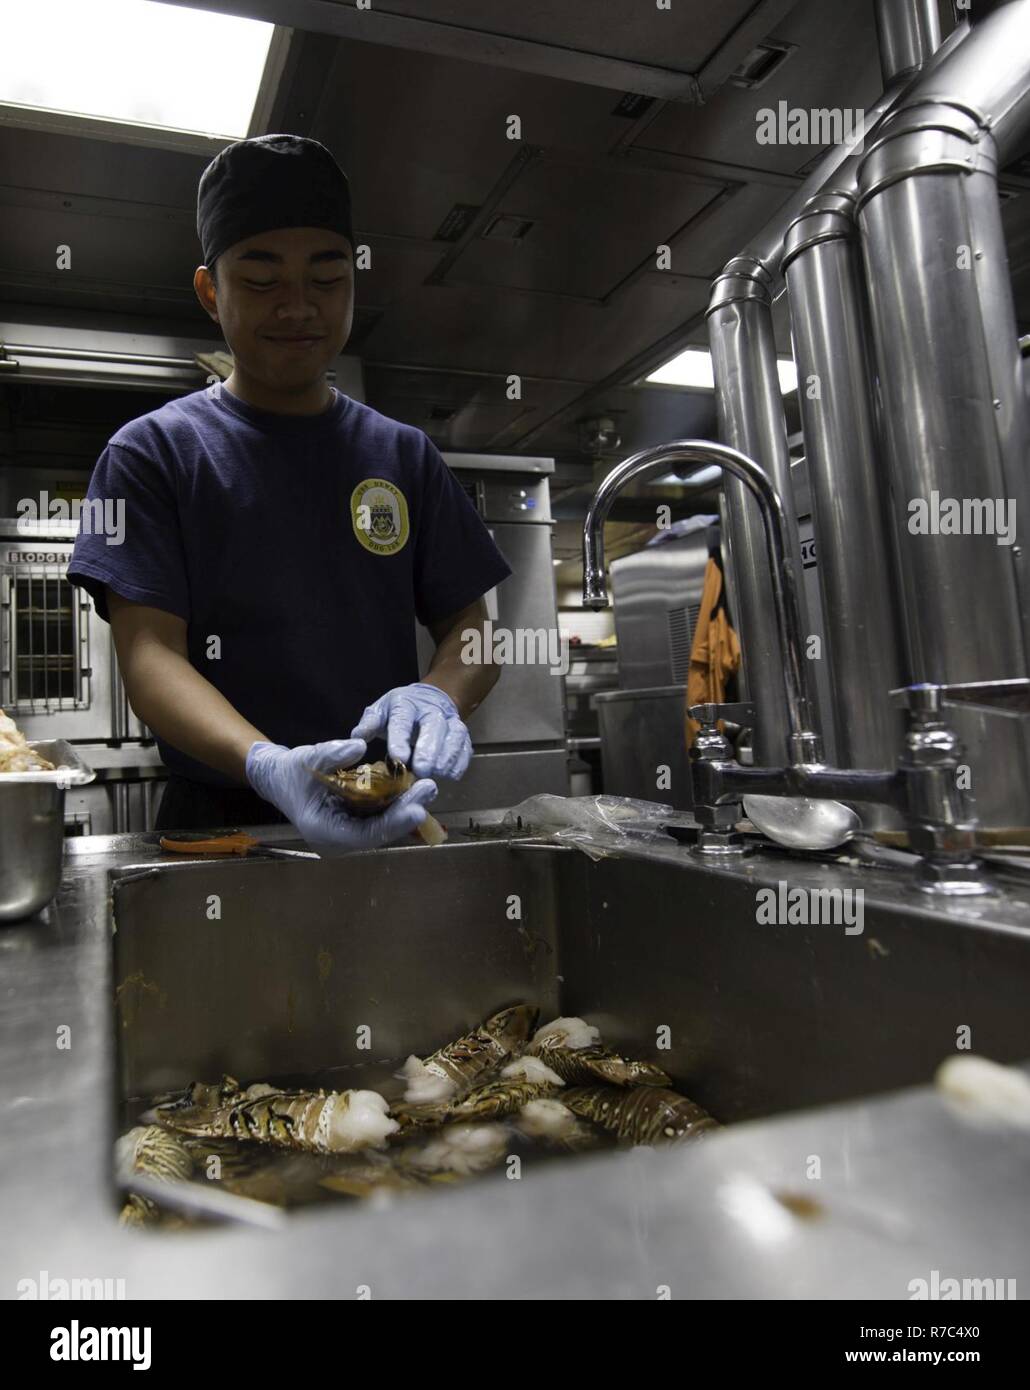 SOUTH CHINA SEA(May 14, 2017)   Christianjo Bejec, a native of the Philippines, prepares lobster in the galley aboard the Arleigh Burke-class guided-missile destroyer USS Dewey (DDG 105).  Dewey is part of the Sterett-Dewey Surface Action Group and is the third deploying group operating under the command and control construct called 3rd Fleet Forward.  The U.S. 3rd Fleet operating forward offers additional options to the Pacific Fleet commander by leveraging the capabilities of 3rd and 7th Fleets. Stock Photo